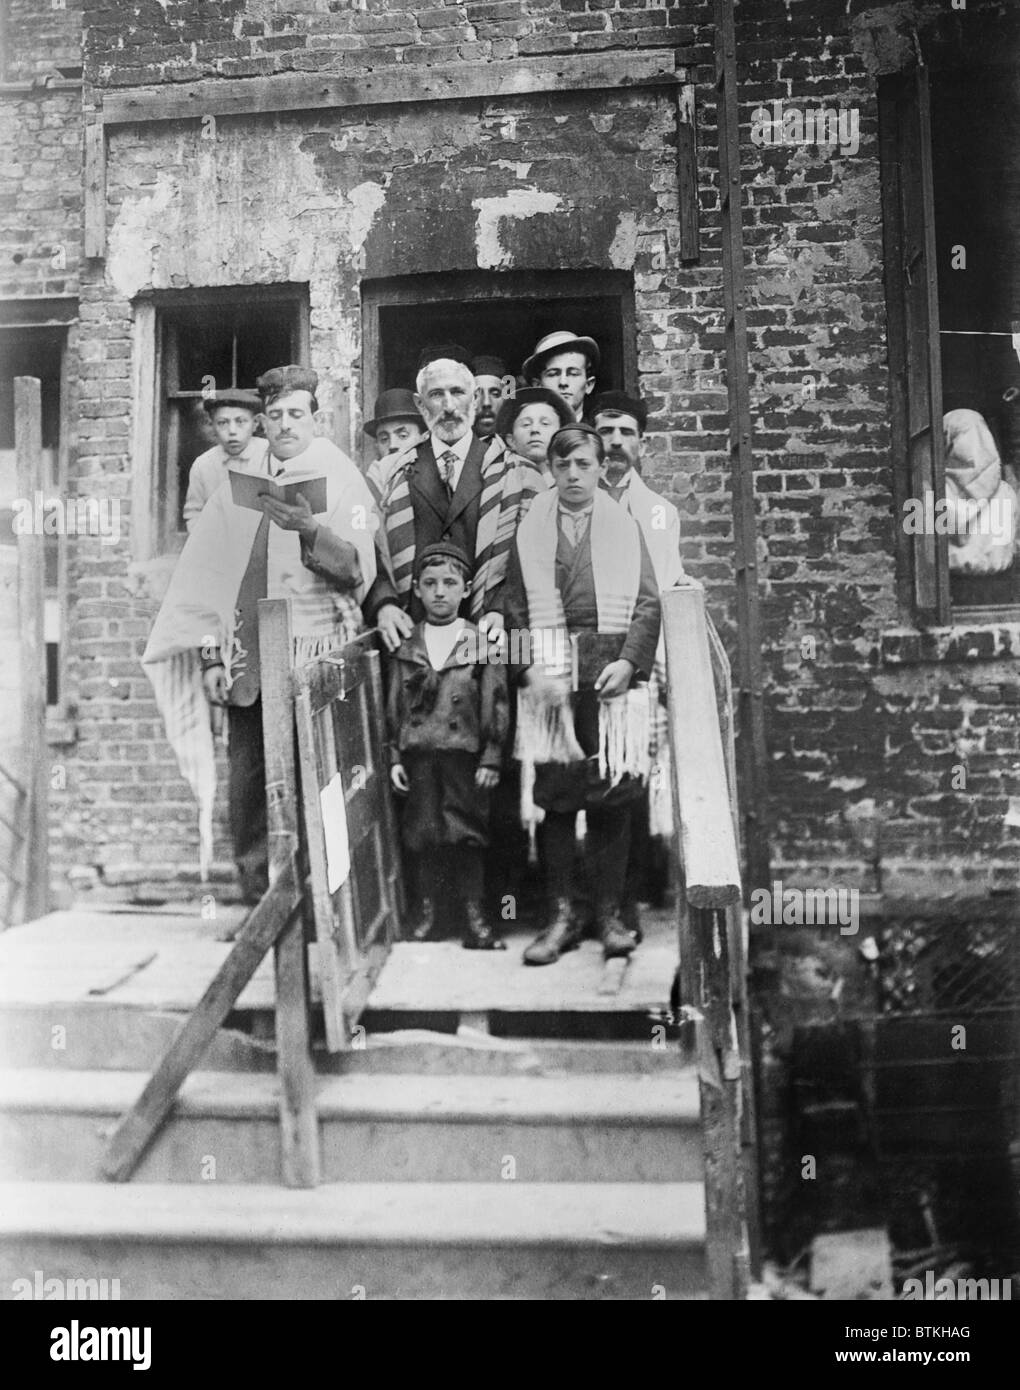 Jewish men and boys in prayer shawls standing in front of a dilapidated tenement synagogue on Yom Kippur. New York City. Ca.1910. Stock Photo